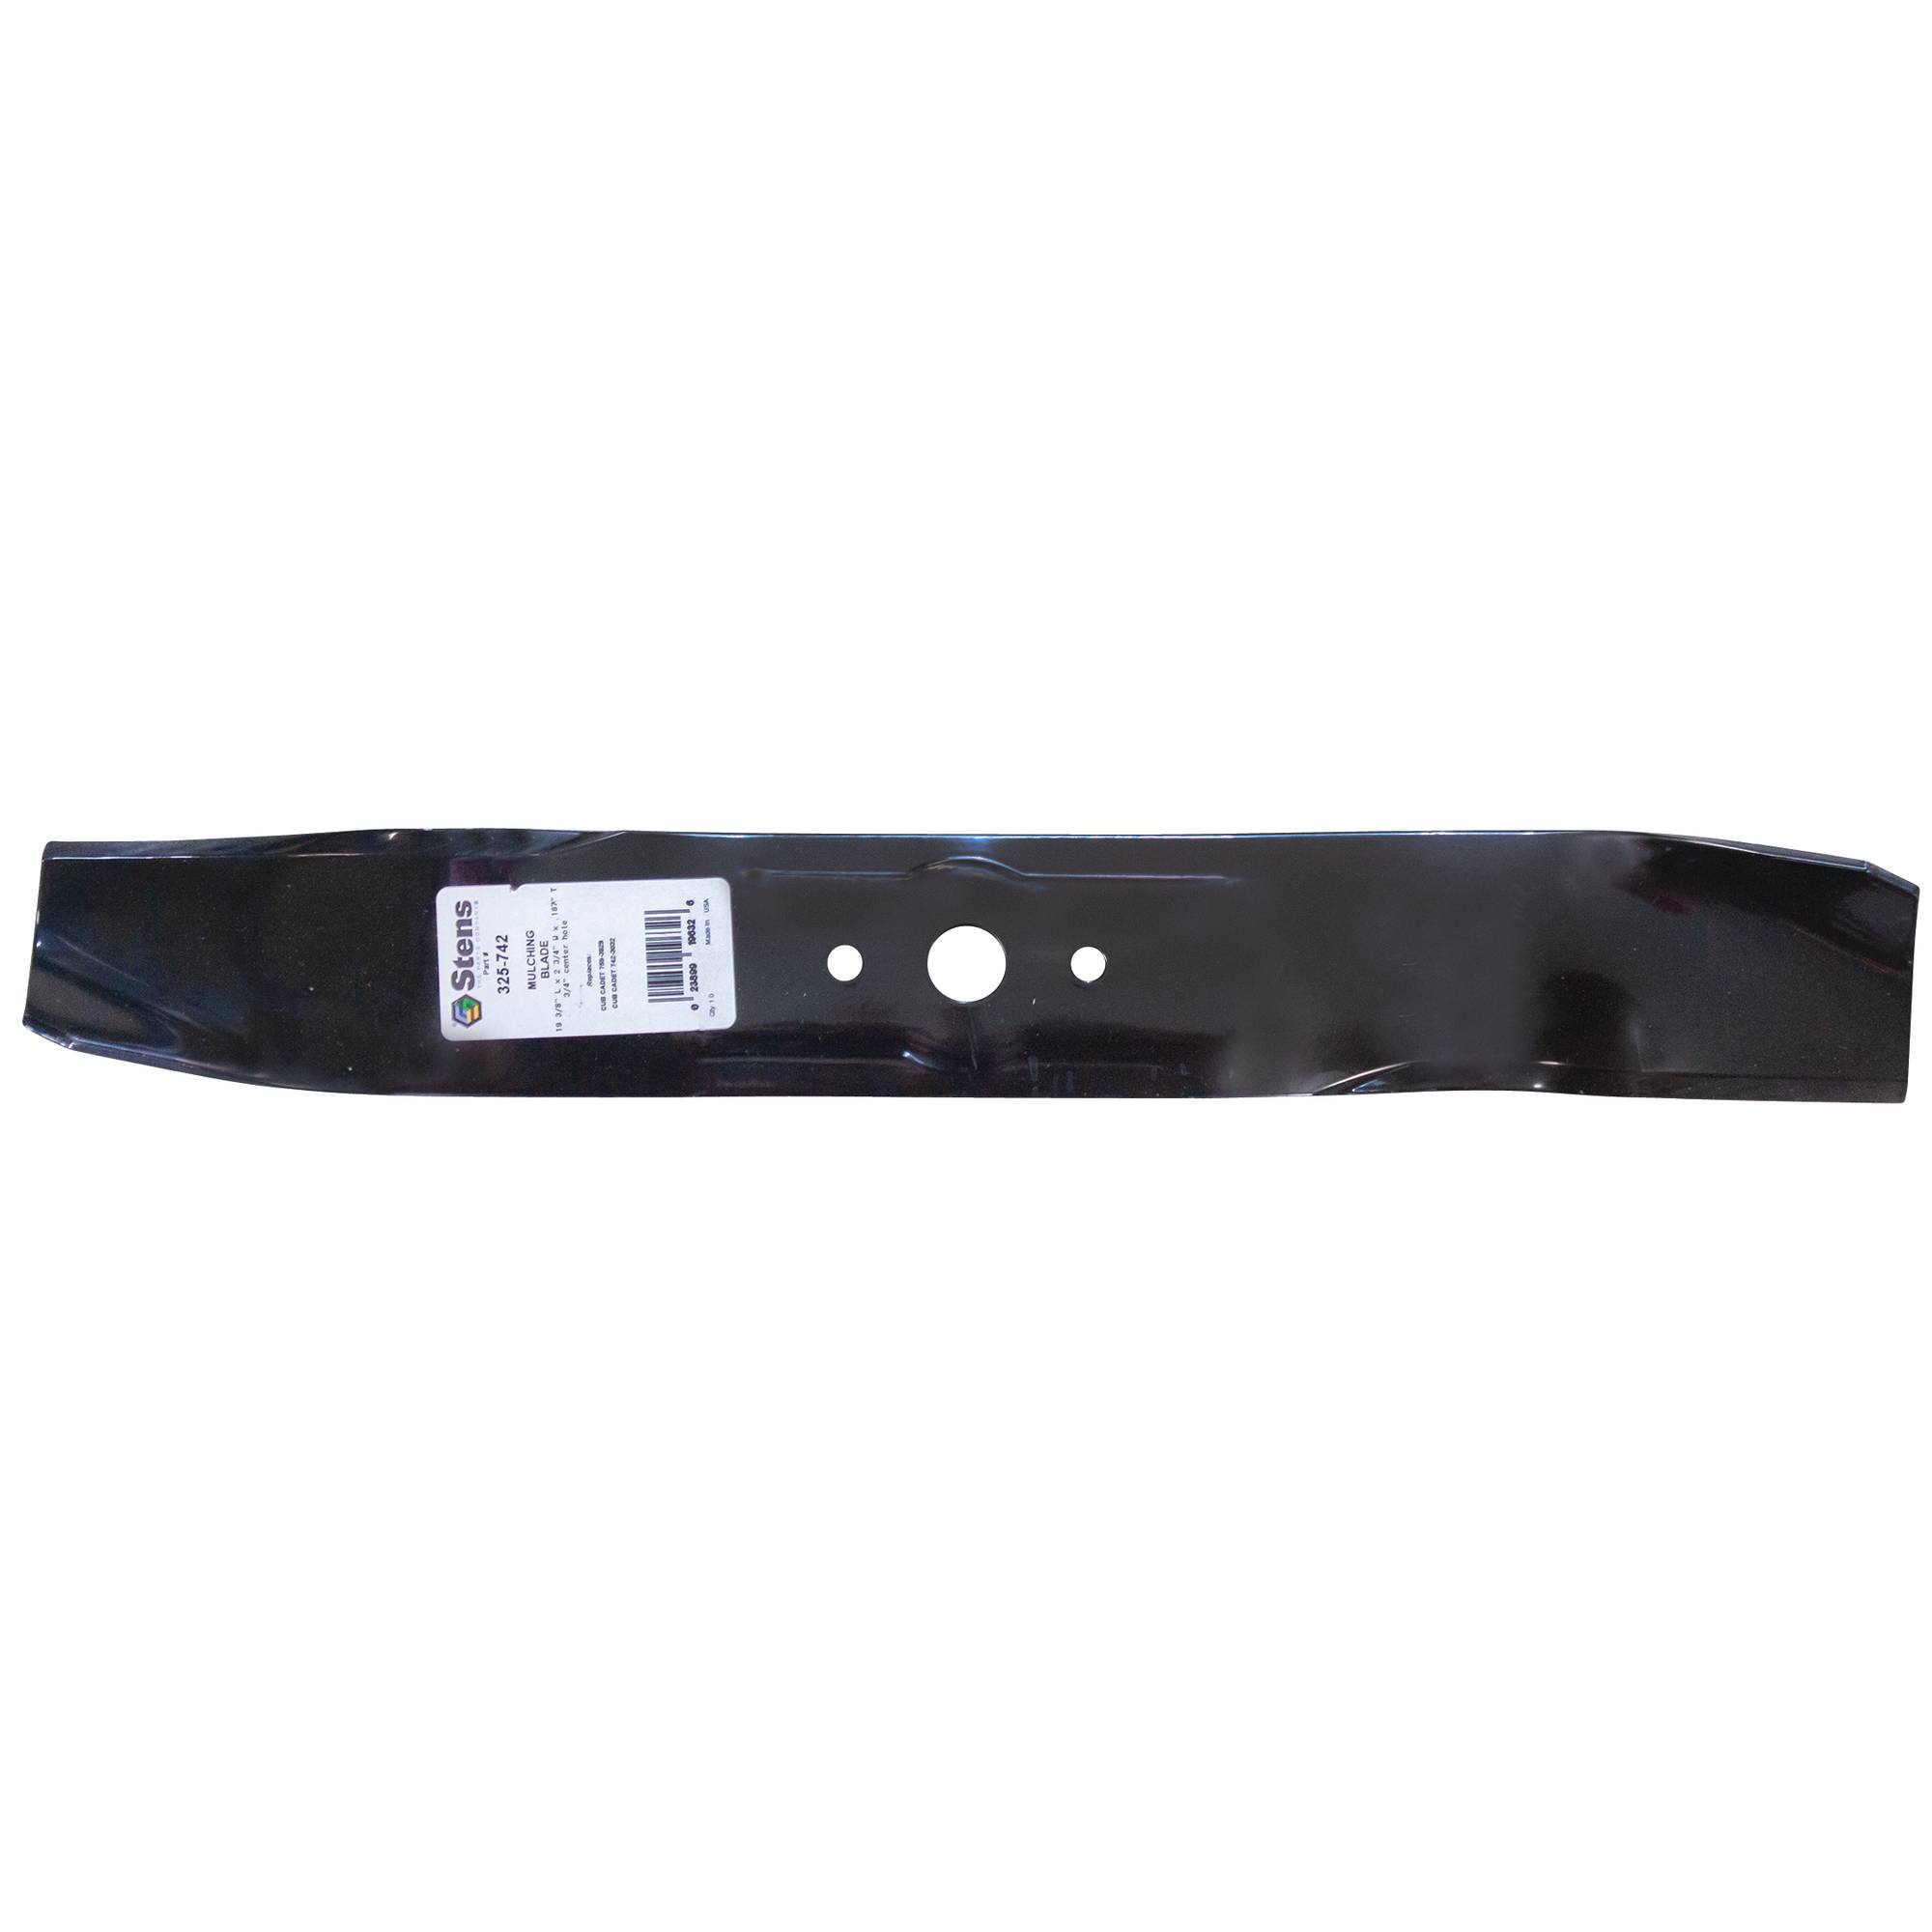 New Stens Mulching Blade 325-742 for Cub Cadet 759-3829 - image 1 of 4